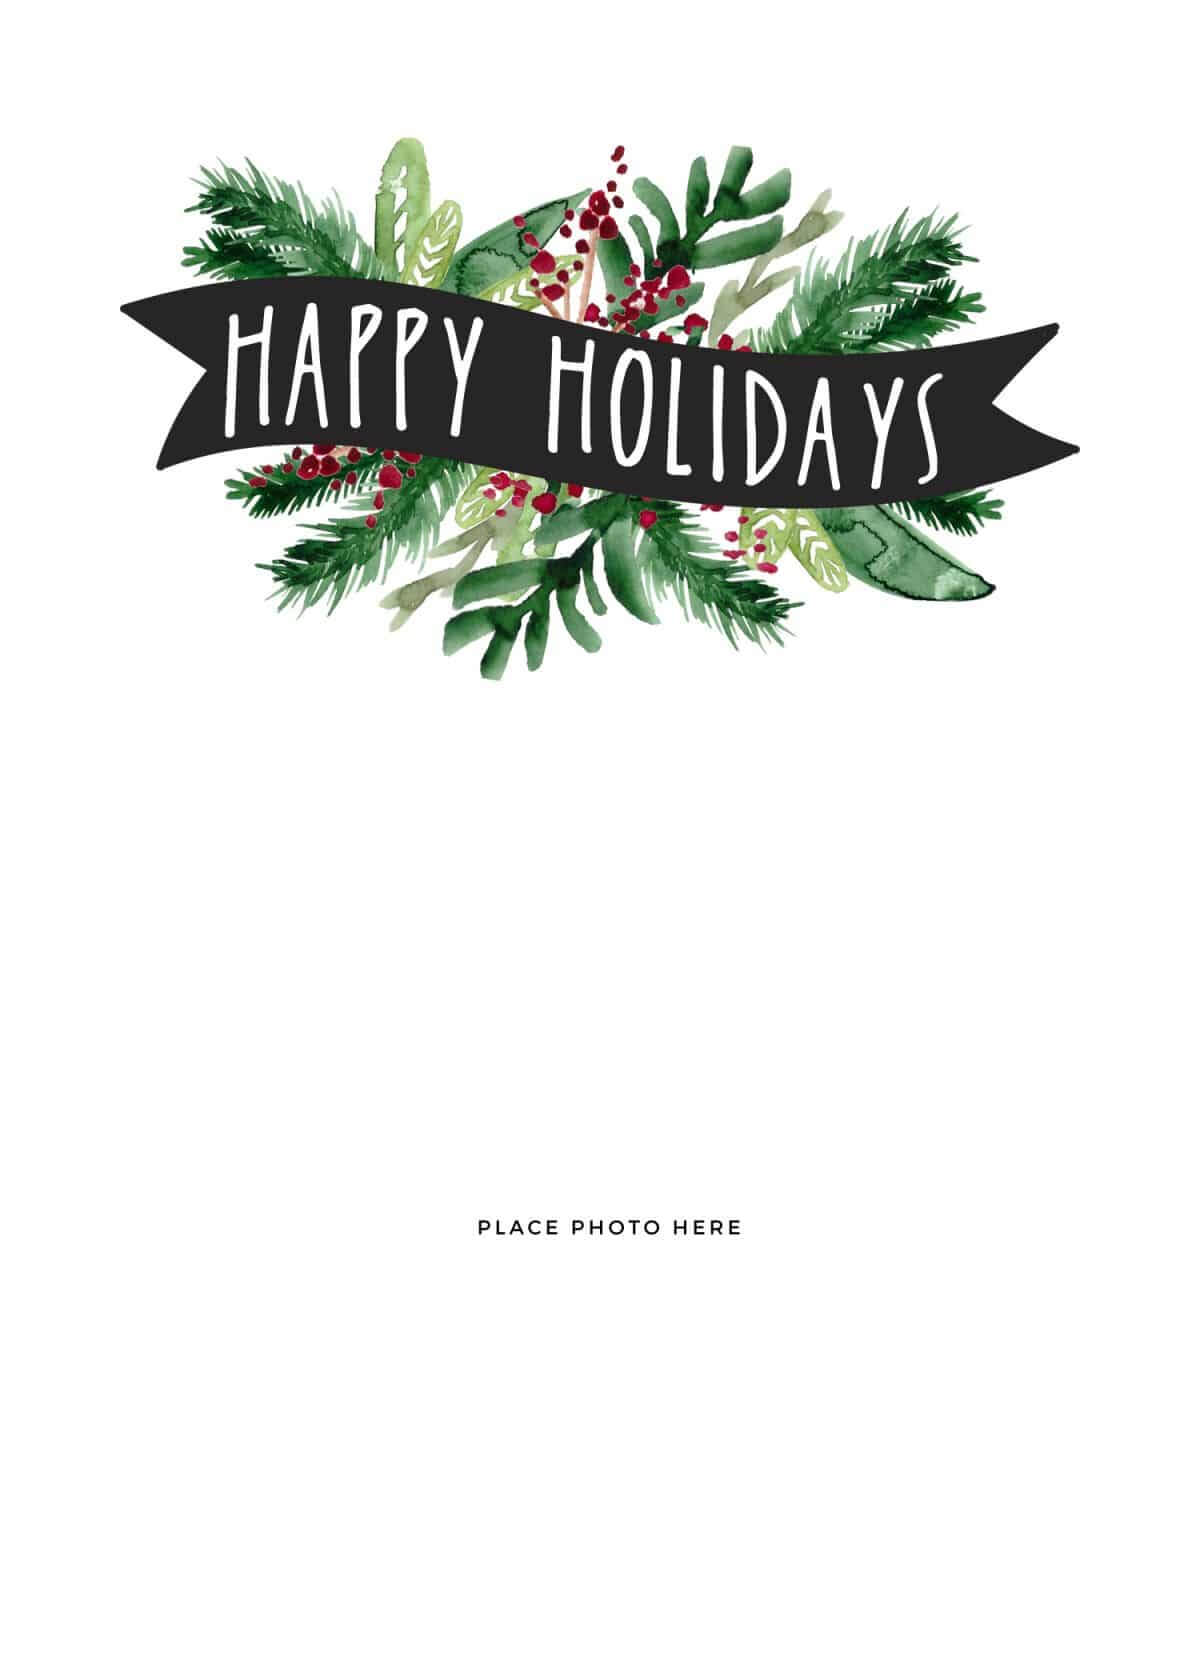 Make Your Own Photo Christmas Cards (For Free!) – Somewhat In Free Holiday Photo Card Templates